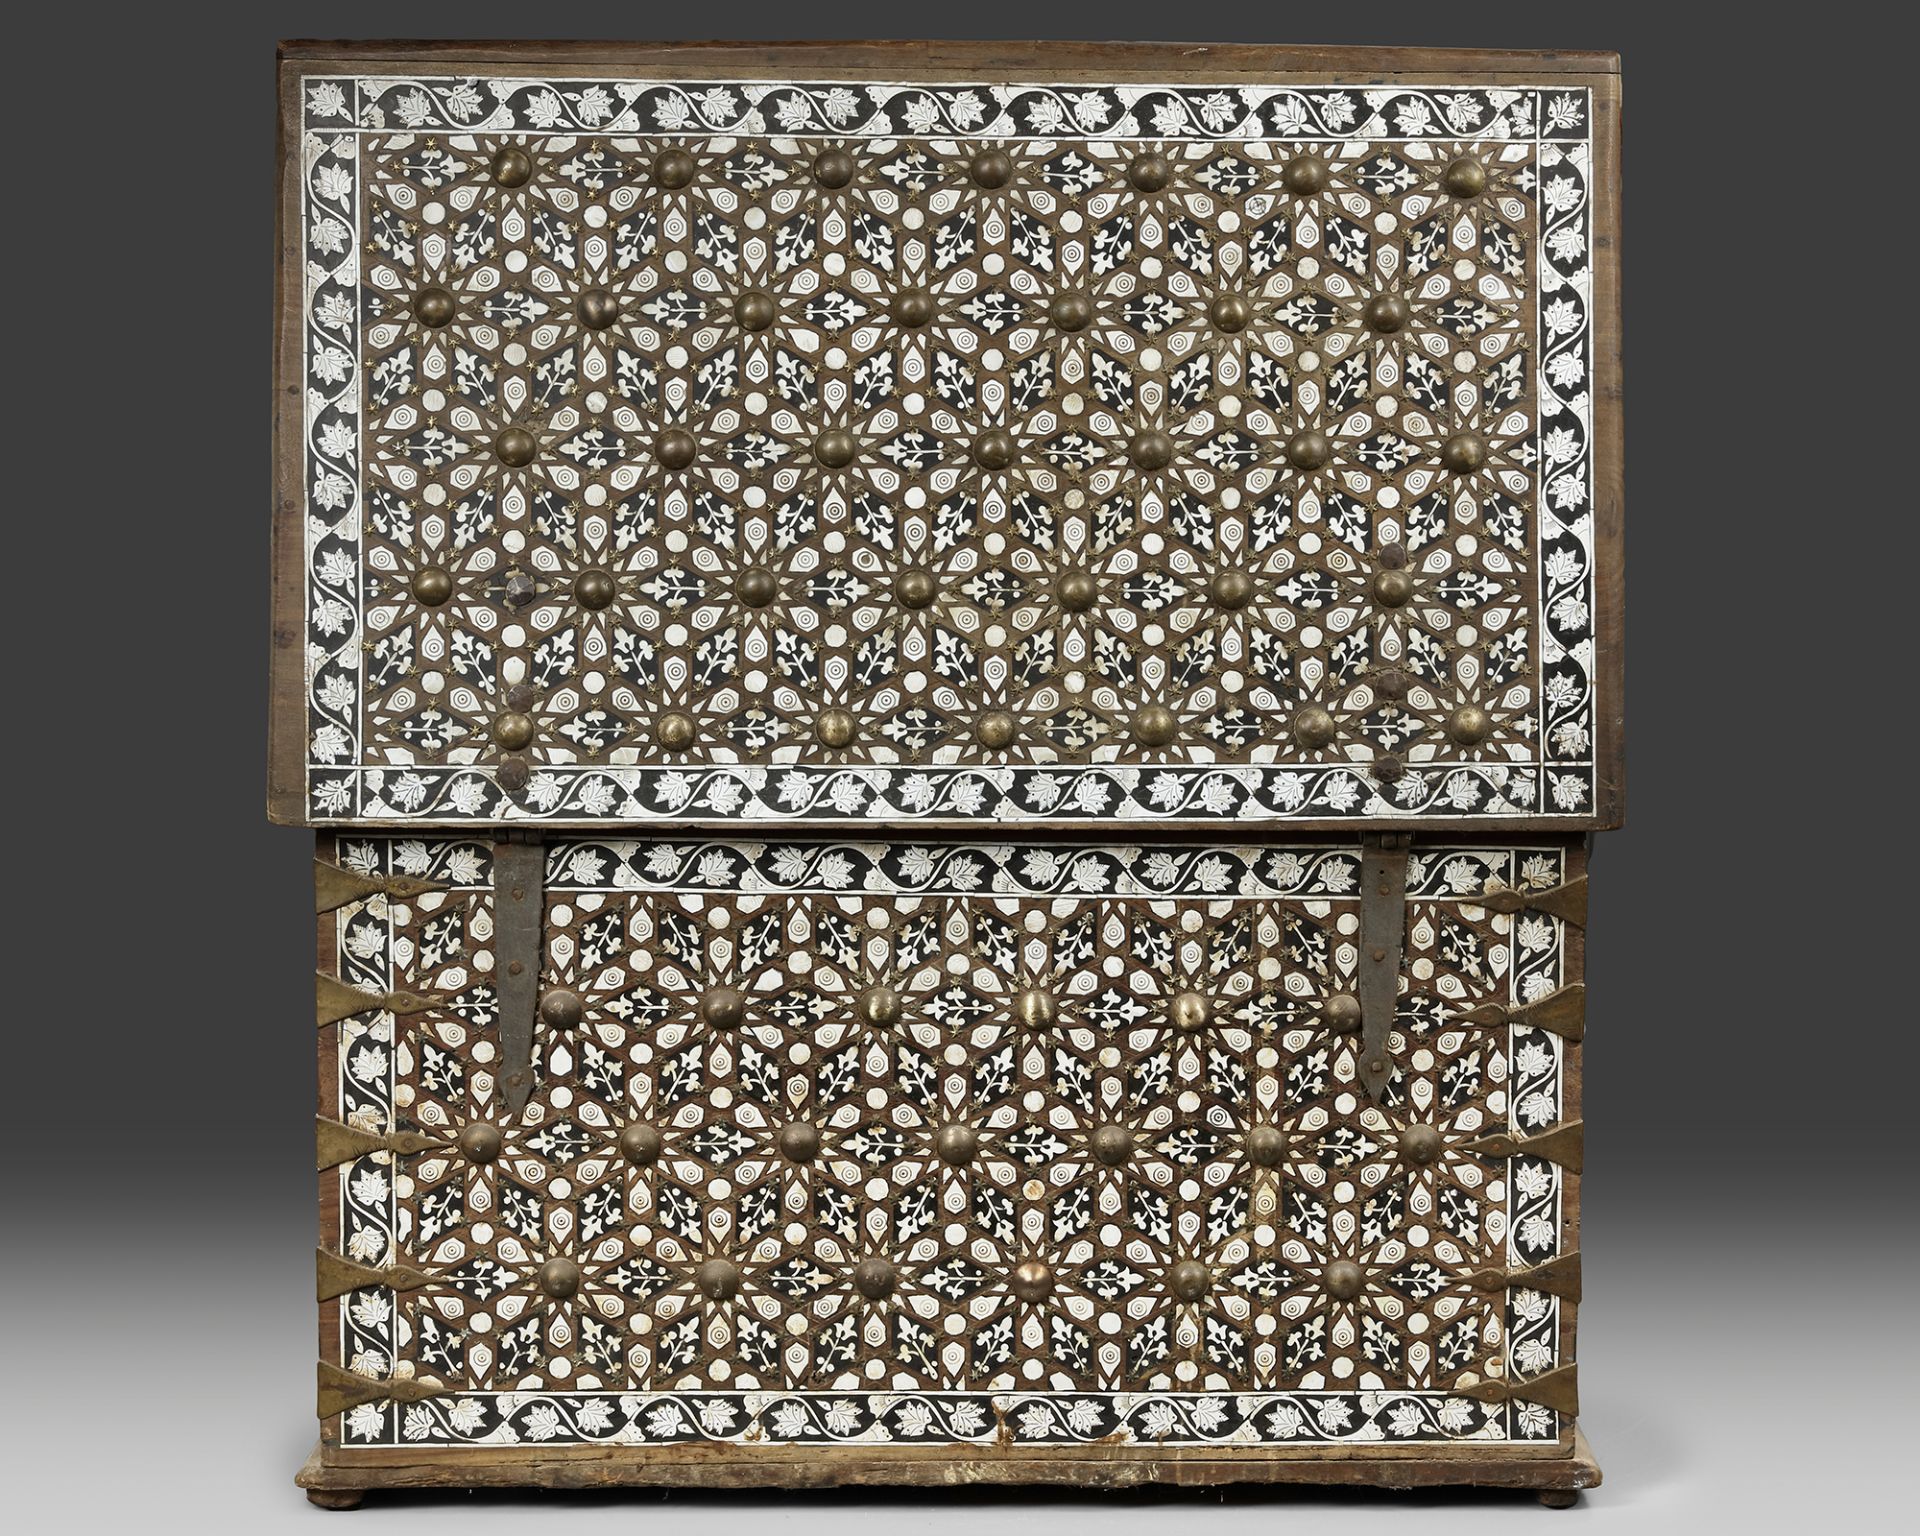 A LARGE OTTOMAN BONE INLAID WOODEN CHEST, SYRIA, LATE 19TH-EARLY 20TH CENTURY - Image 5 of 5